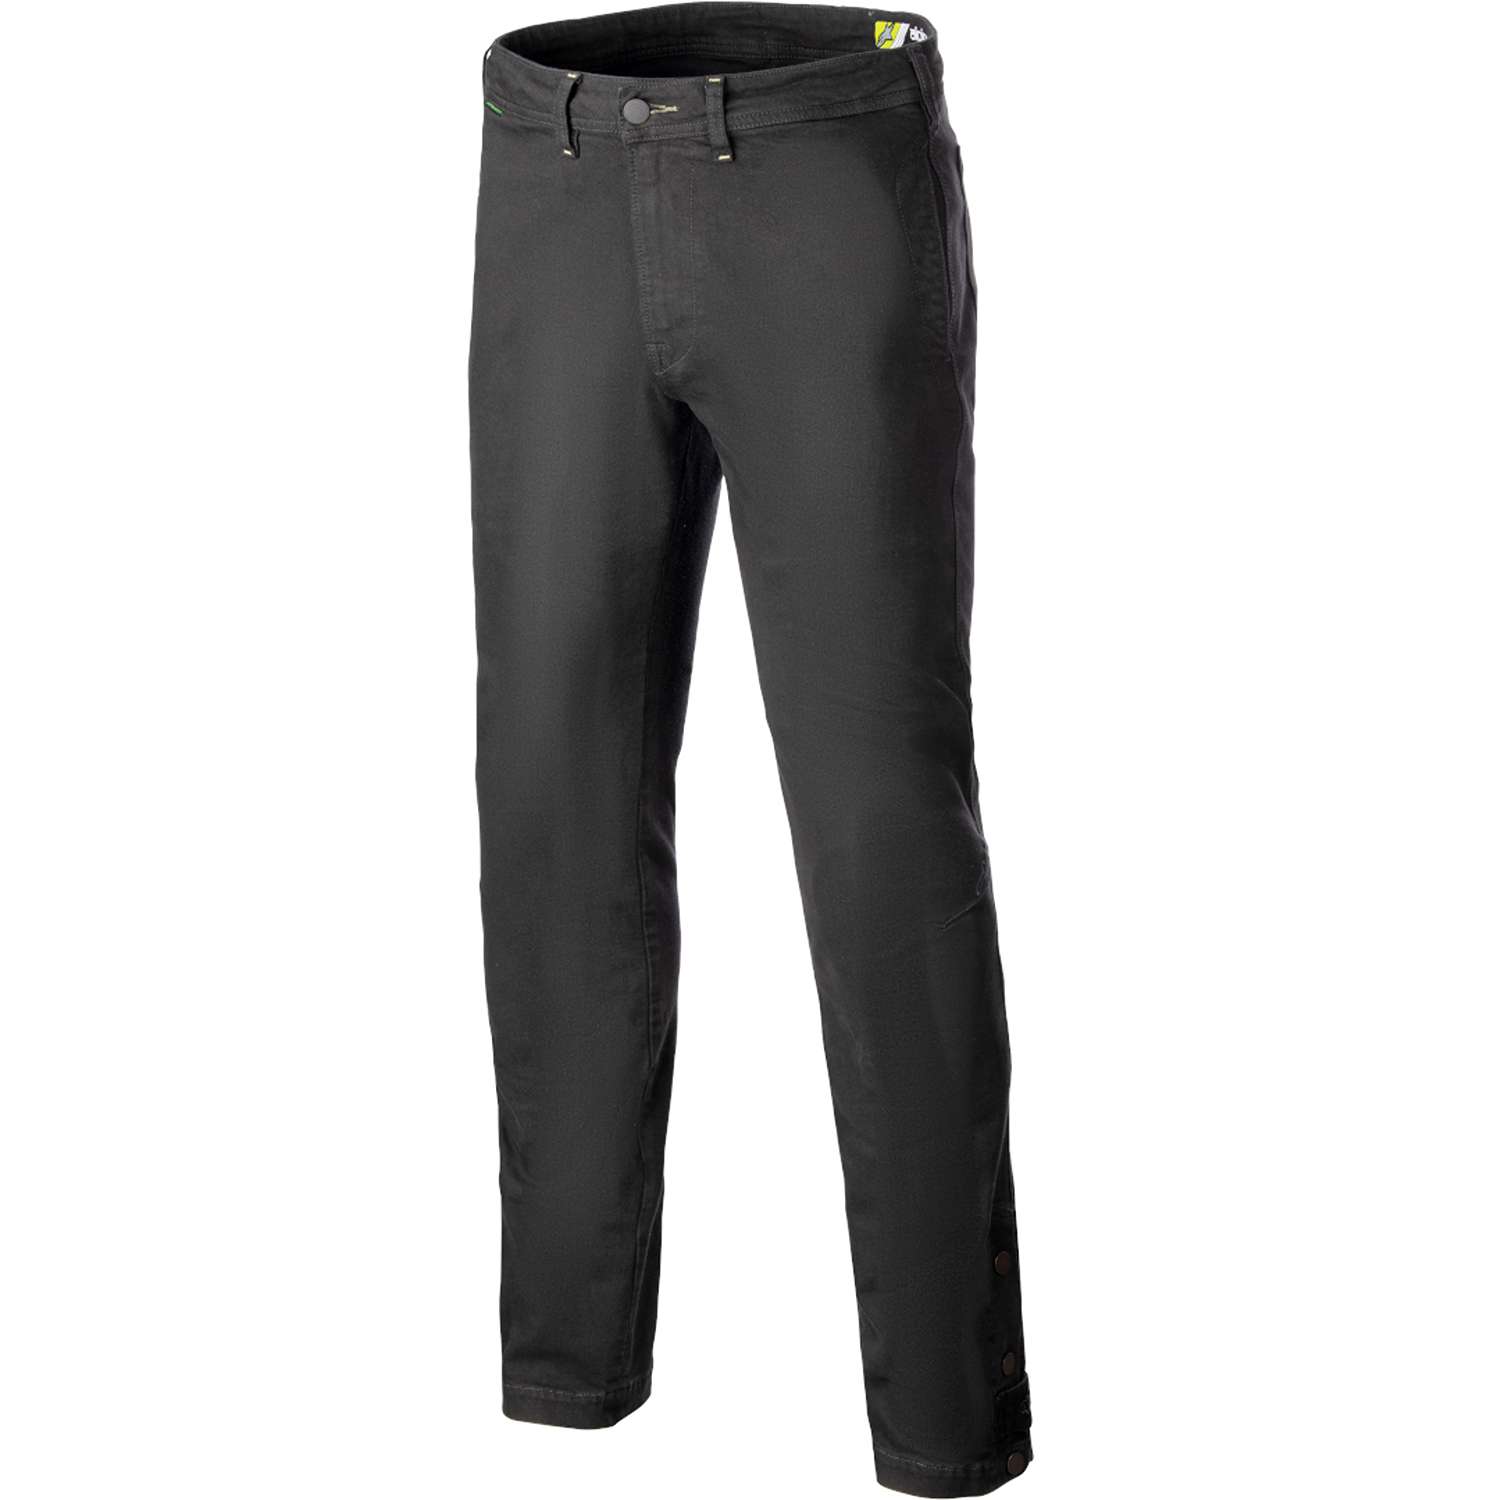 Image of Alpinestars Stratos Regular Fit Tech Riding Pants Anthracite Taille 40